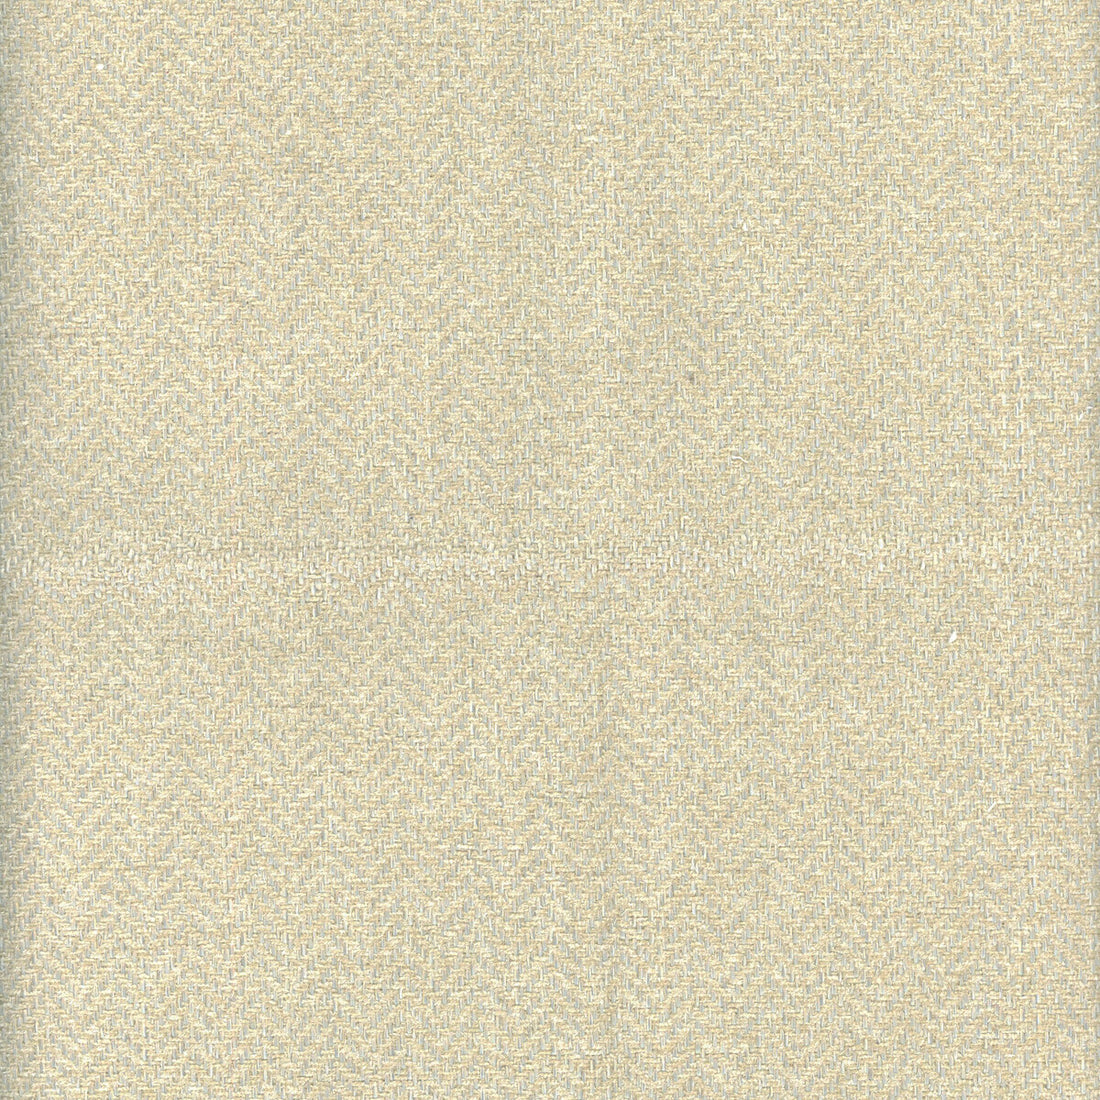 Nevada fabric in stone color - pattern AM100329.1.0 - by Kravet Couture in the Andrew Martin Canyon collection